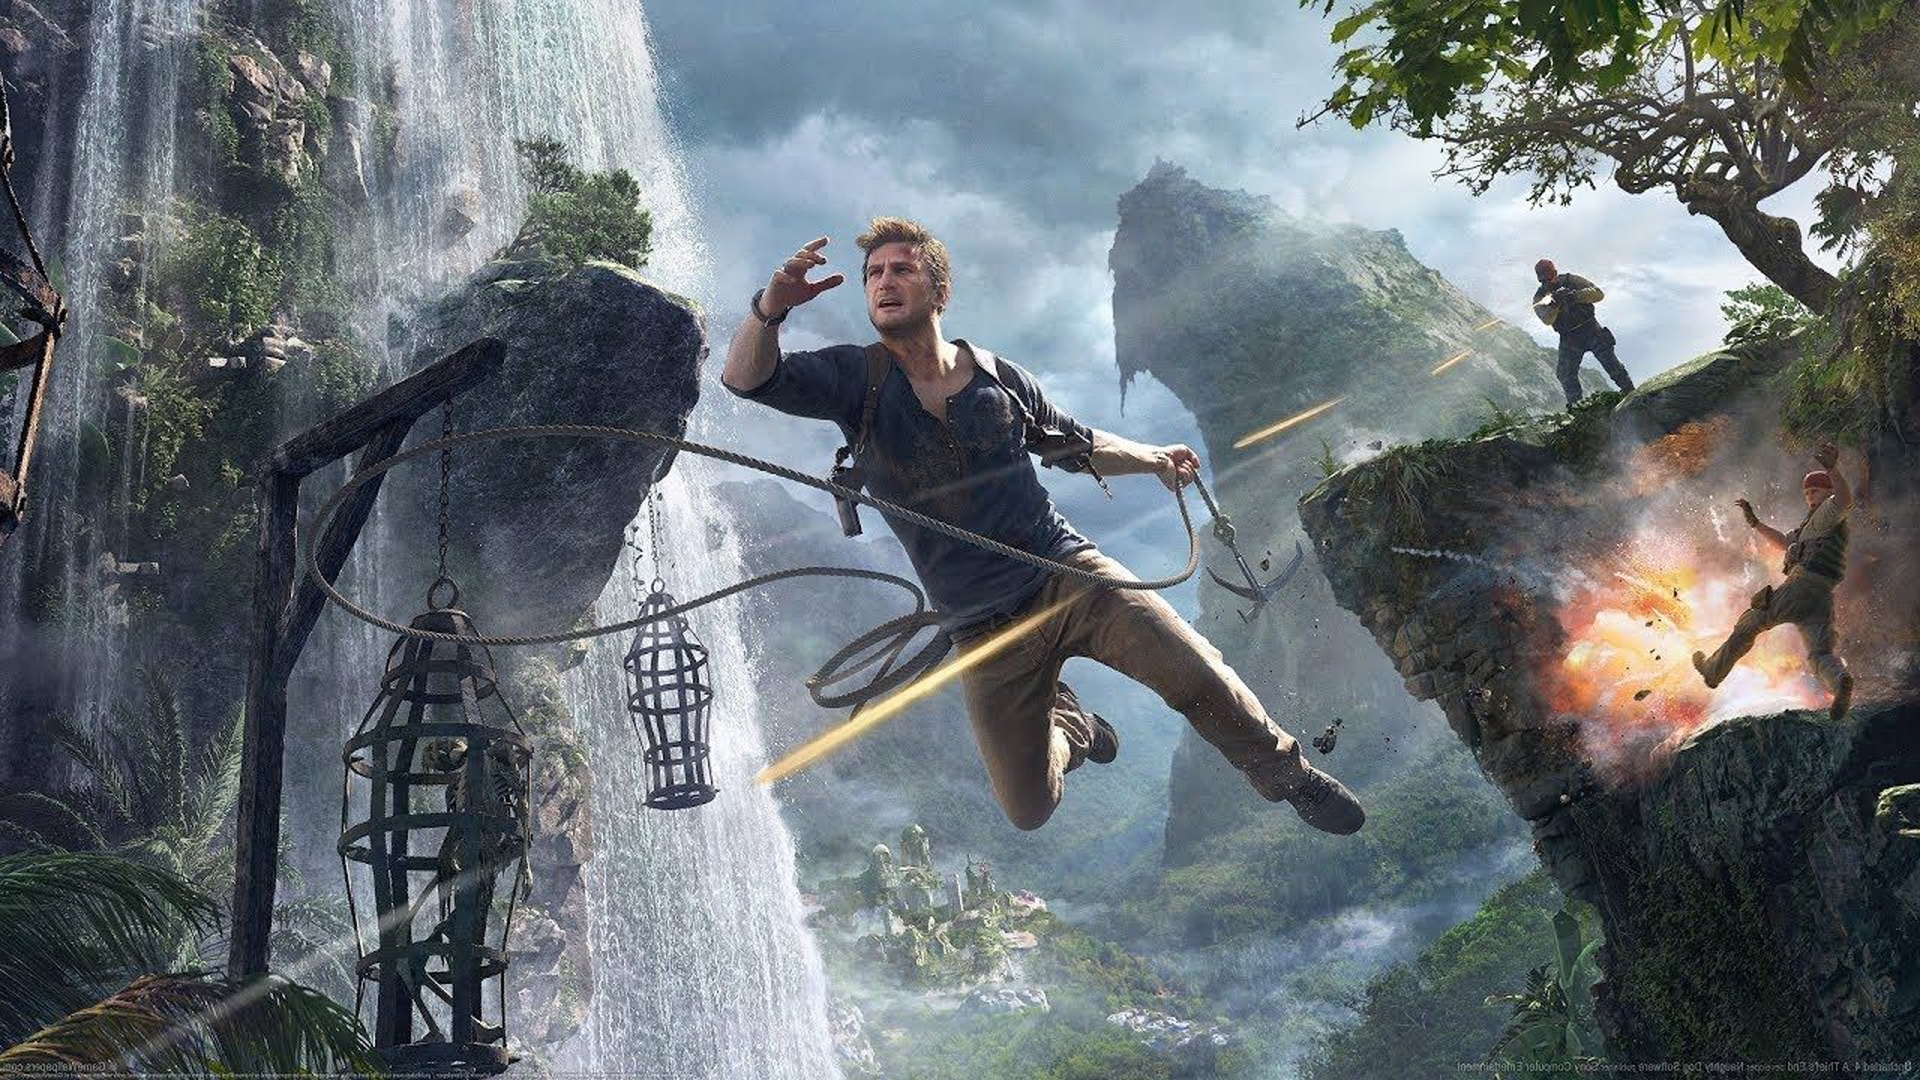 Rumor: Uncharted 4: A Thief's End Lego Set to be Released Soon - MP1st